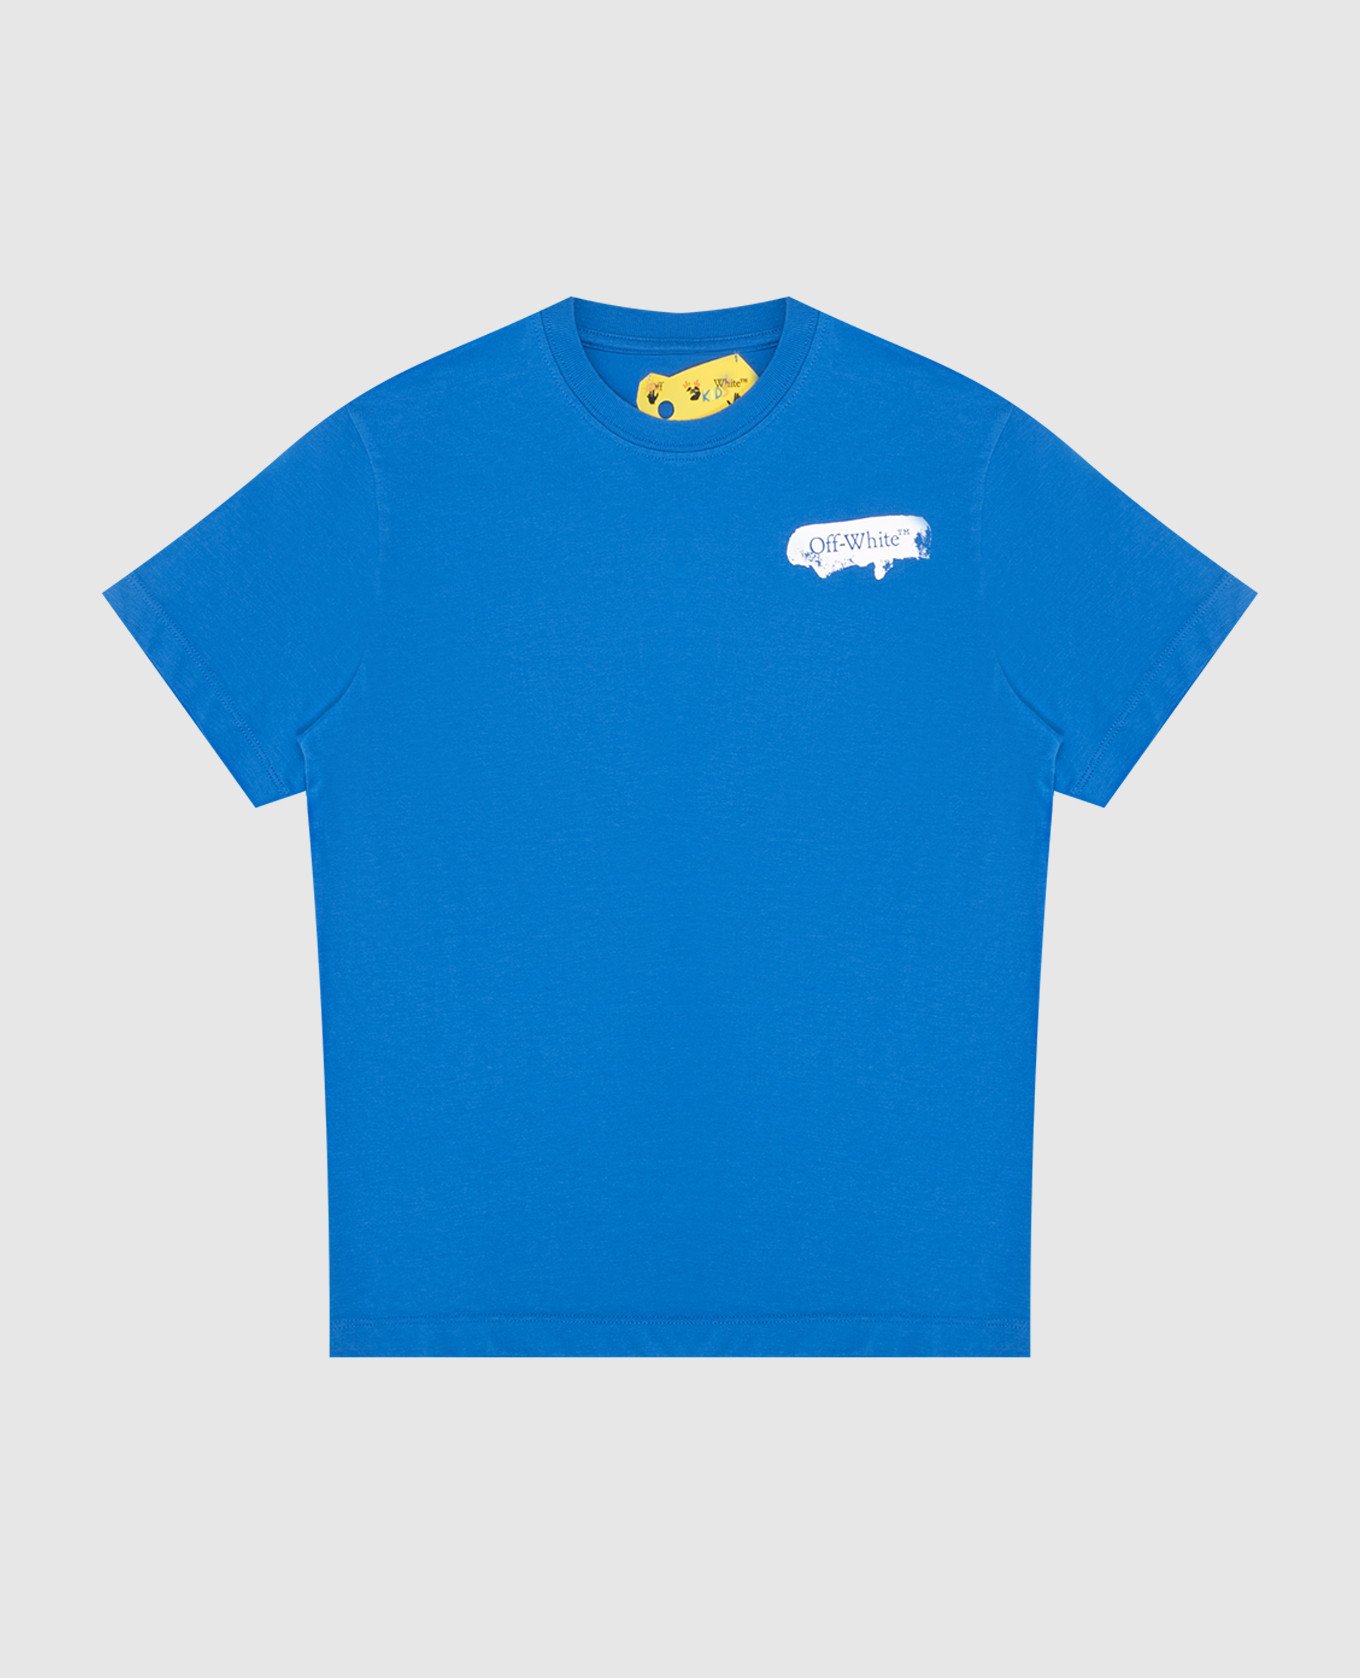 Children's blue t-shirt with Graphic logo print